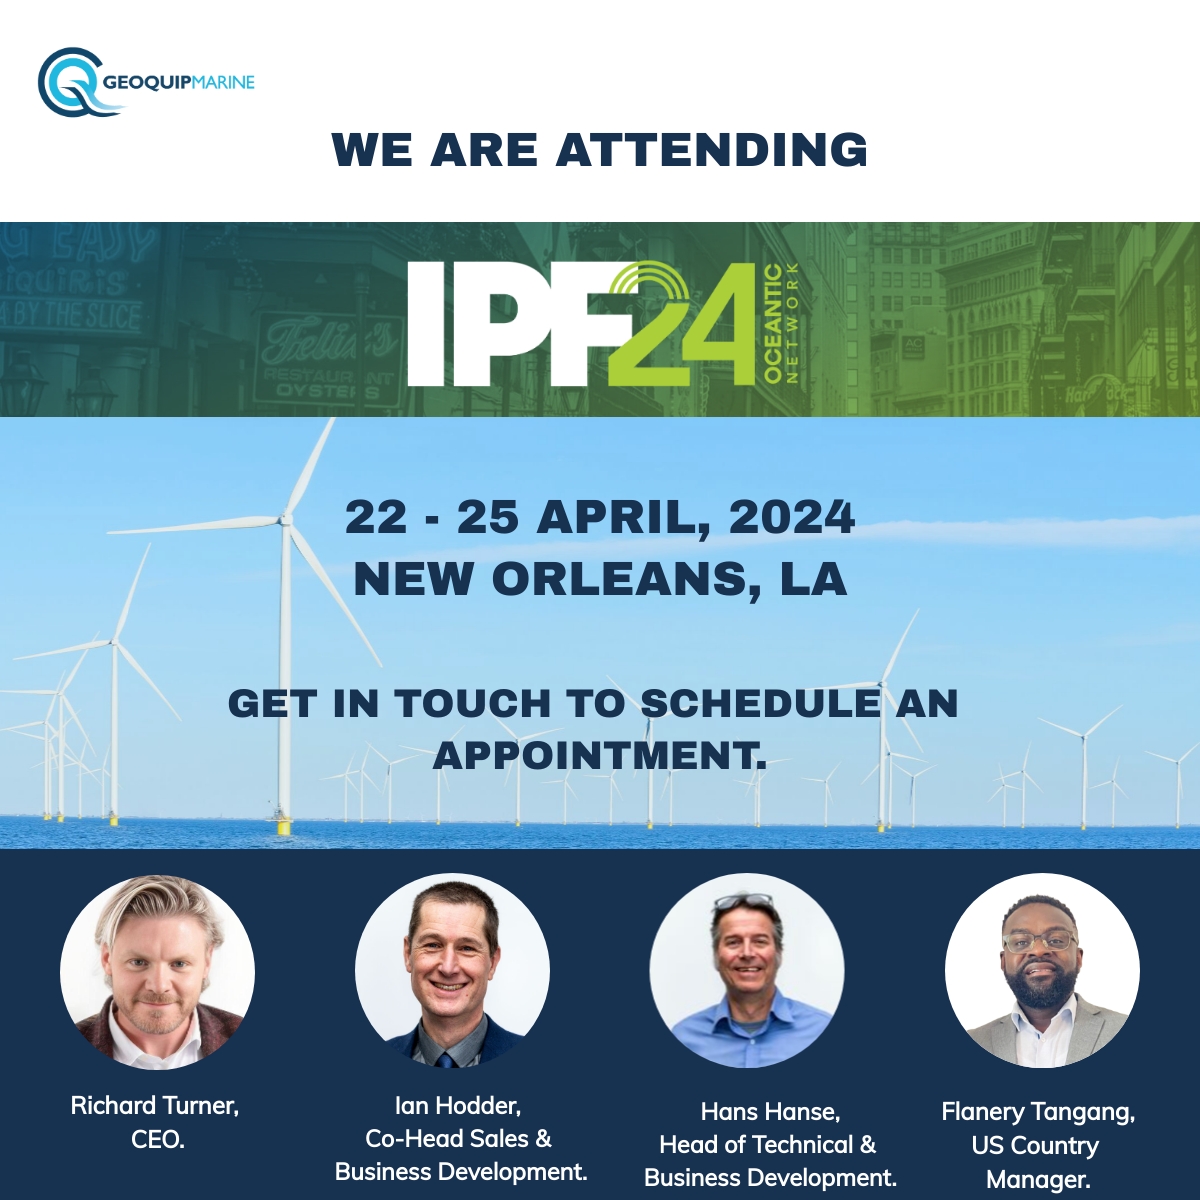 We are excited to attend The International Partnering Forum (IPF) in New Orleans from April 22 to 25, 2024.
Get in touch to arrange a meeting info@geoquip-marine.com. We look forward to seeing you there!
#IPF2024 #renewableenergy #windenergy #offshoreenergy